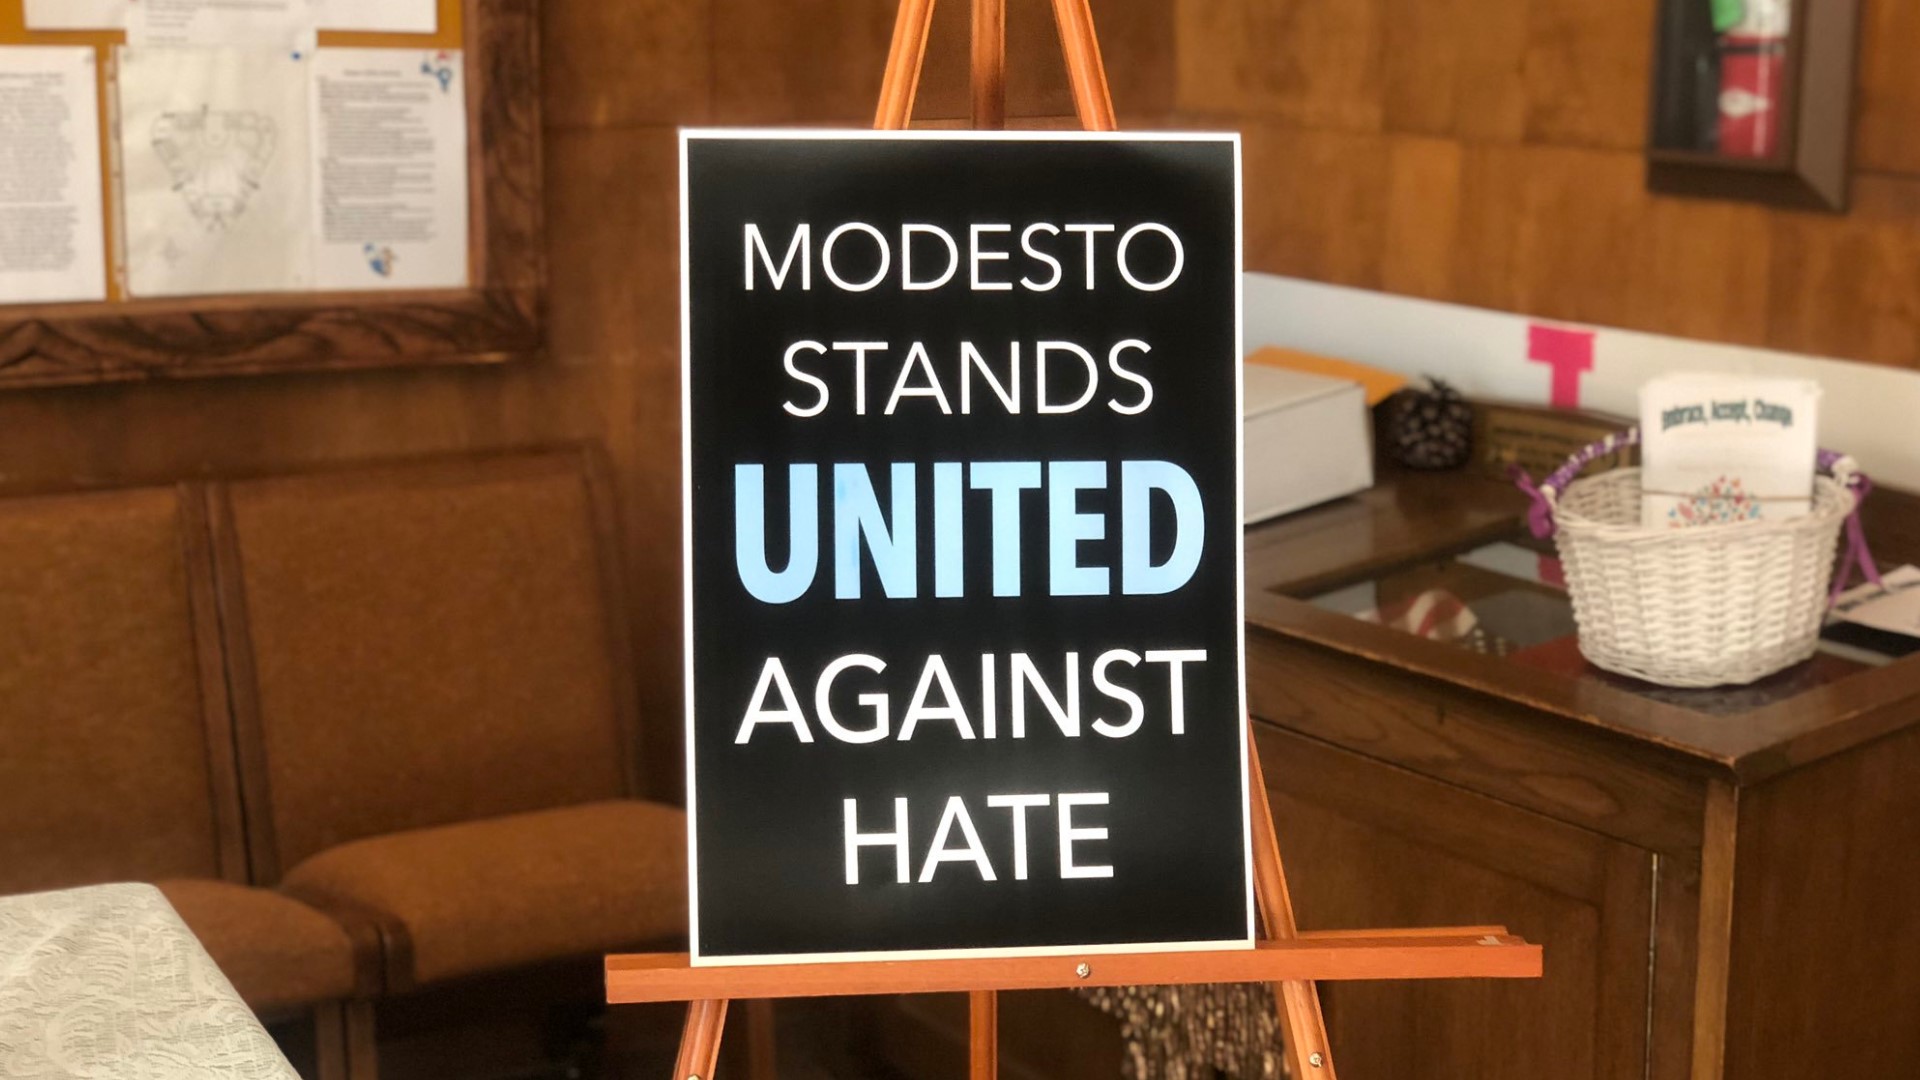 As organizers of the controversial 'straight pride' event prepare for Saturday, hundreds of Modestans packed St. Paul's Episcopal Church Friday evening for a vigil aimed at celebrating Modesto's diversity.